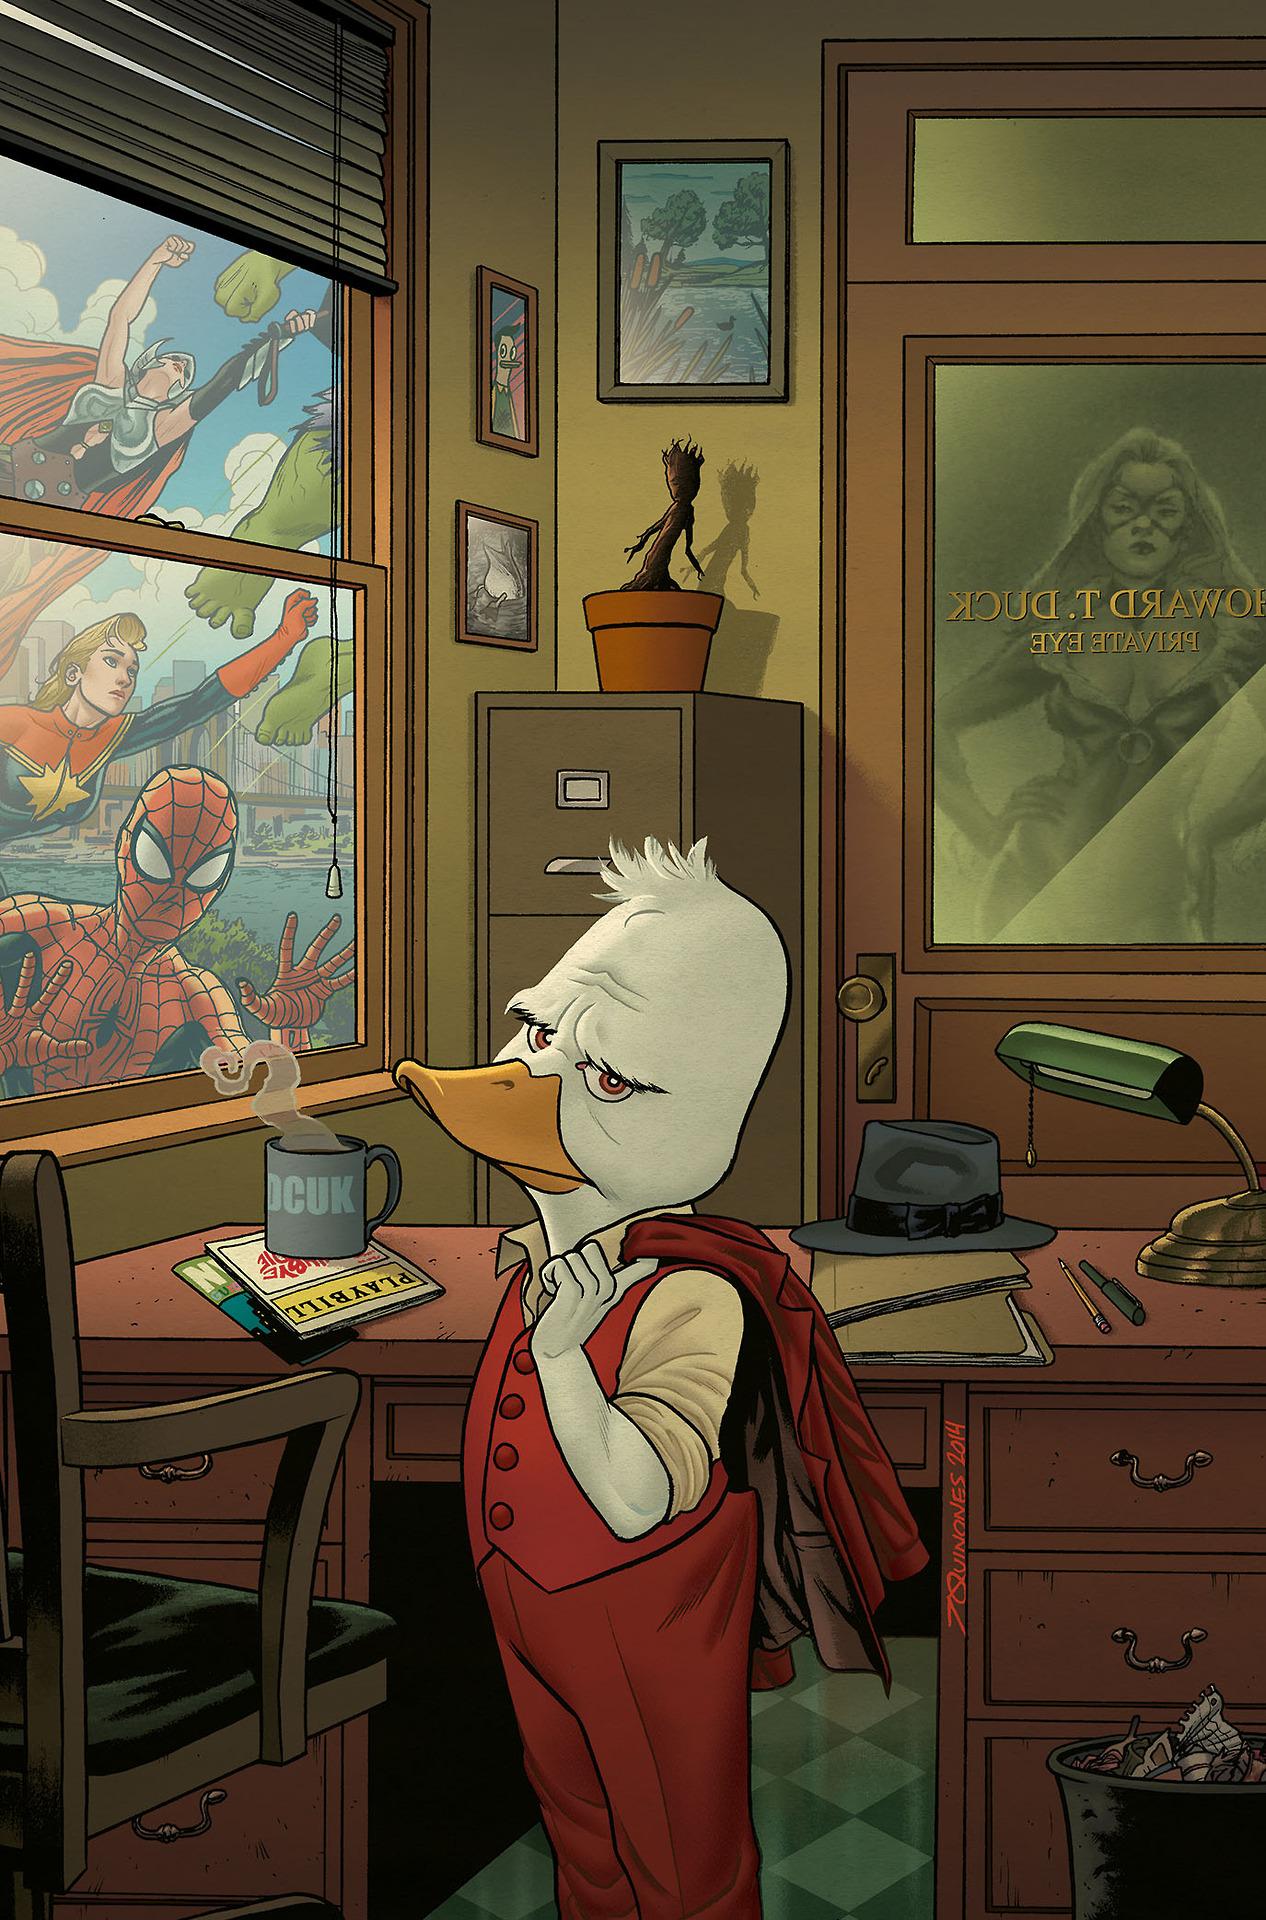 1266x1920px Howard The Duck 837.96 KB